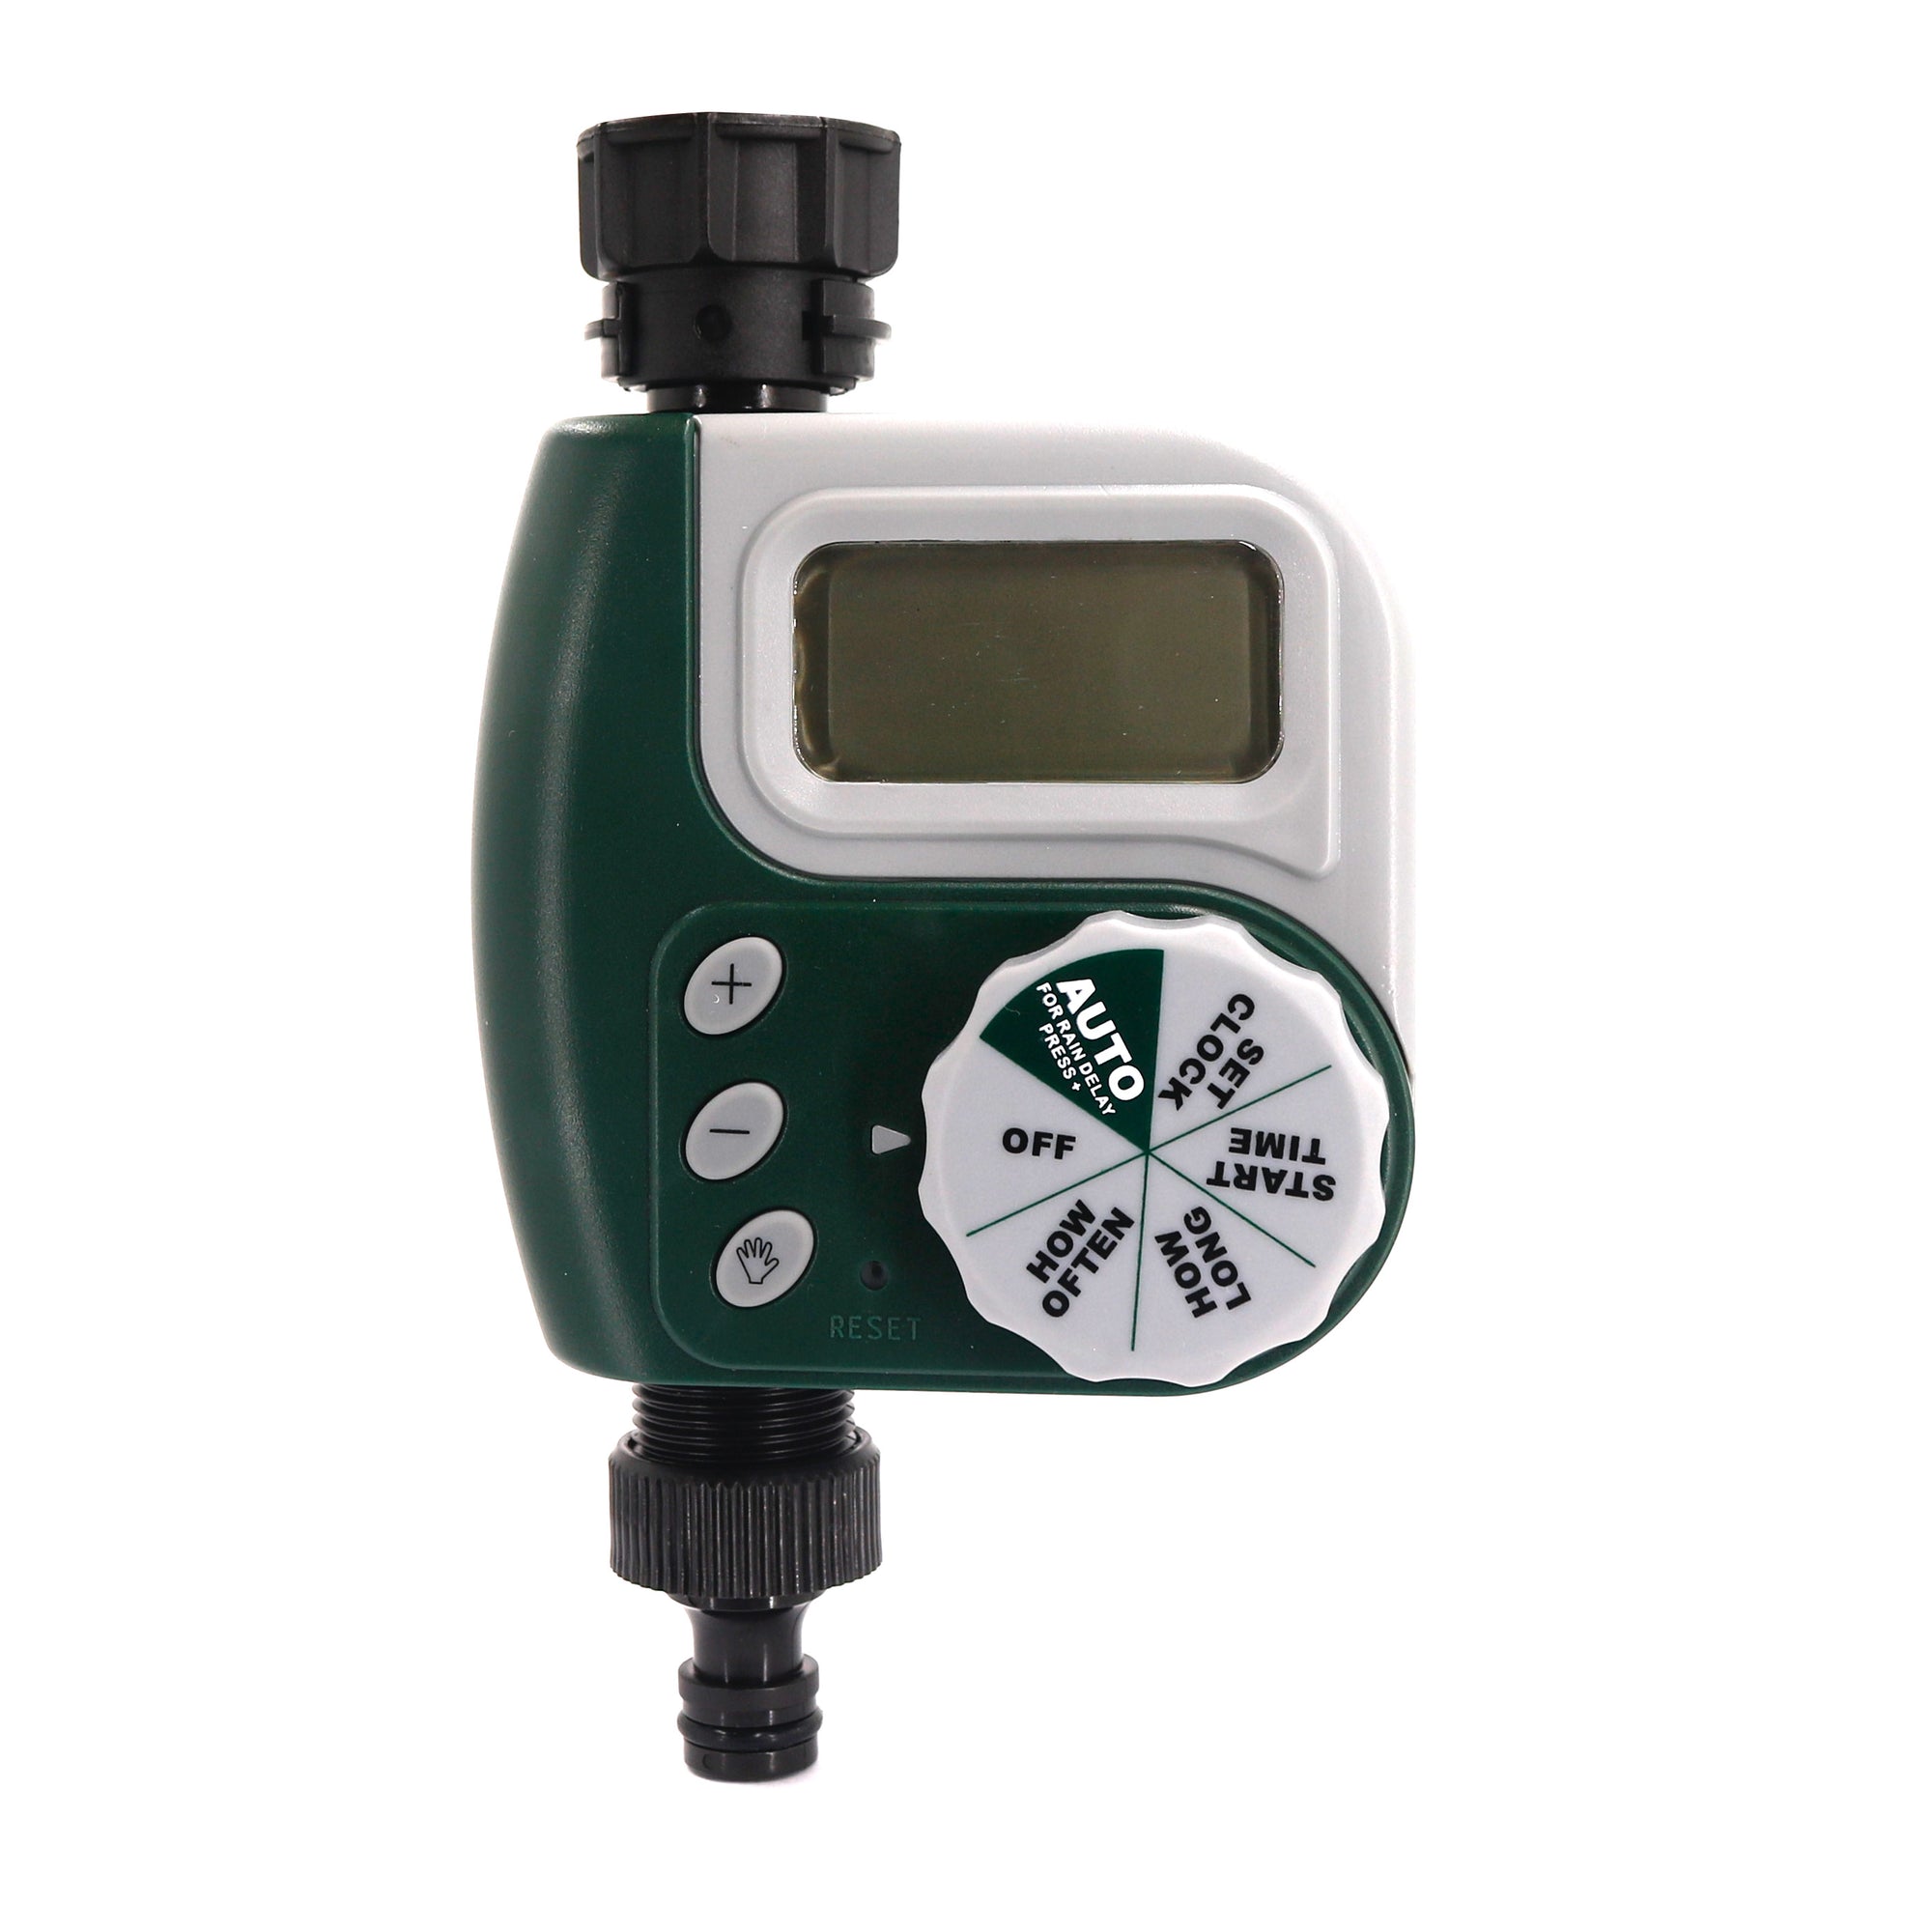 Automatic Watering Device Hose Faucet Timer Irrigation Controller